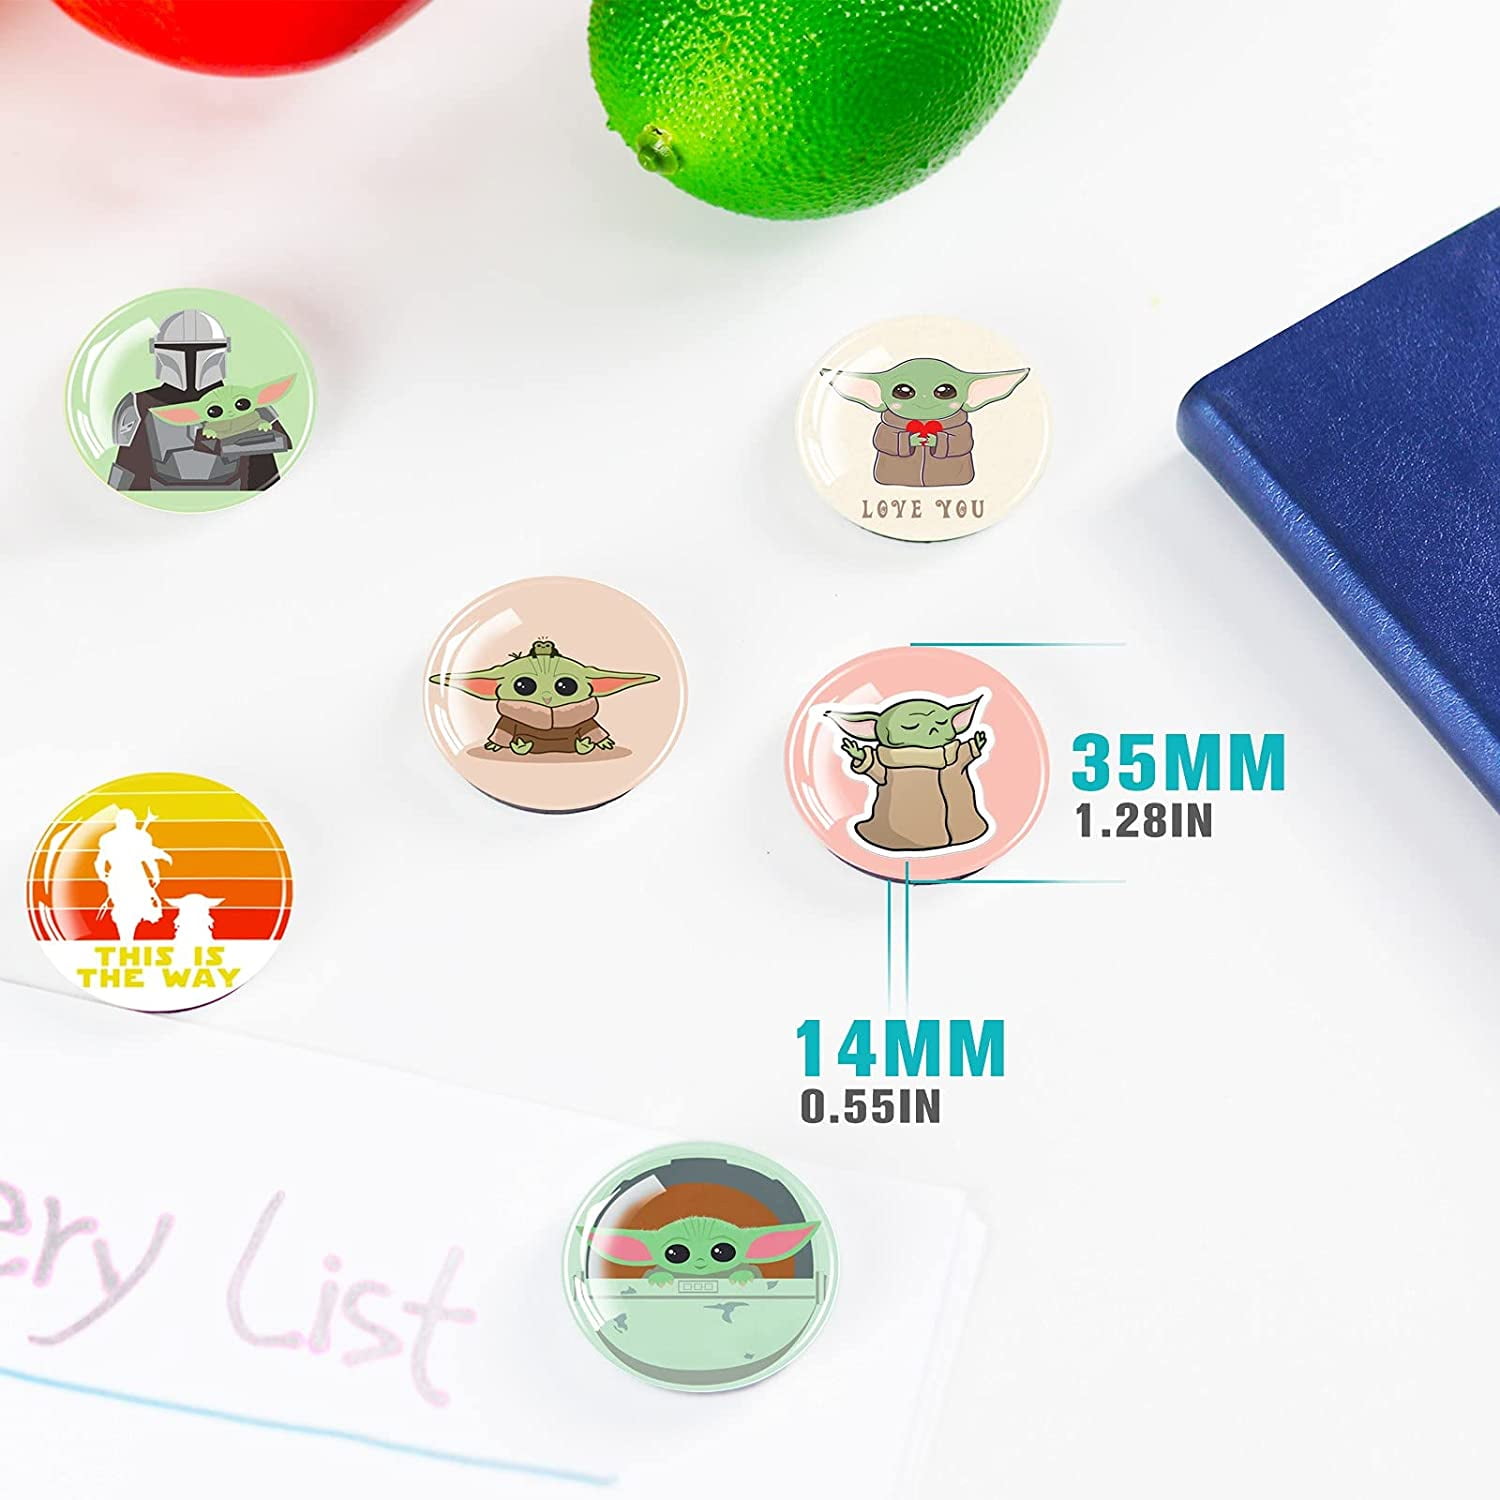 Cute Fridge Magnets for Classroom and Office Decorative Magnets for Whiteboard Locker Magnets for Boys and Girls Baby Yoda Refrigerator Magnets 01 Glass Fridge Magnet 